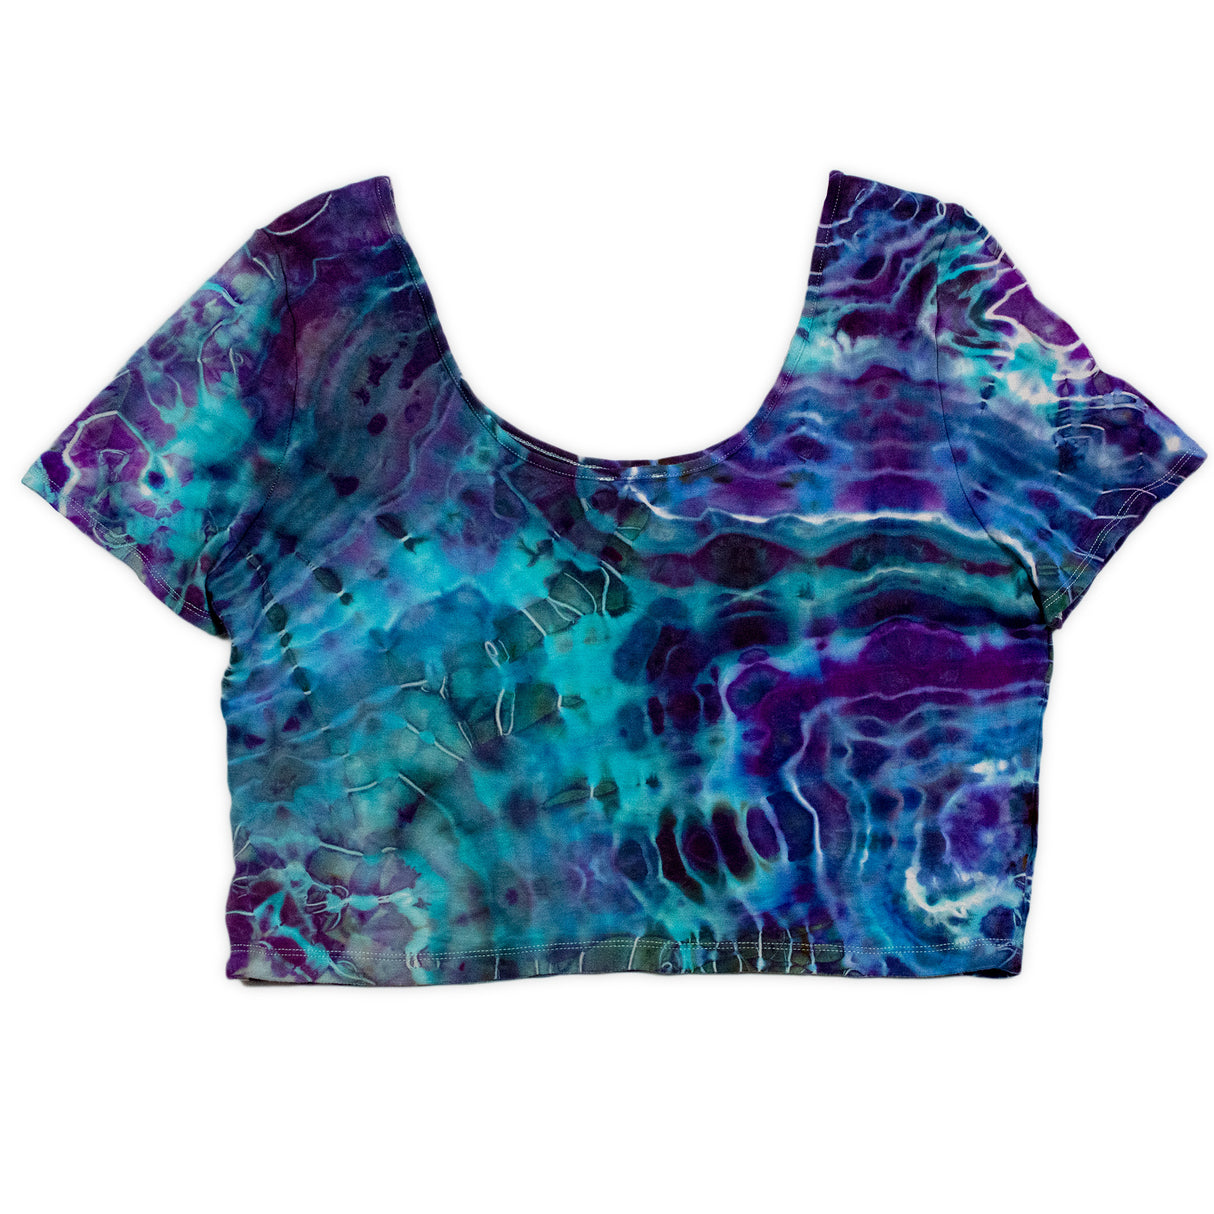 An artistic ice-dye design dominates this cropped t-shirt, with a fusion of amethyst, sapphire, and seafoam green colors, complete with a casual scoop neck.